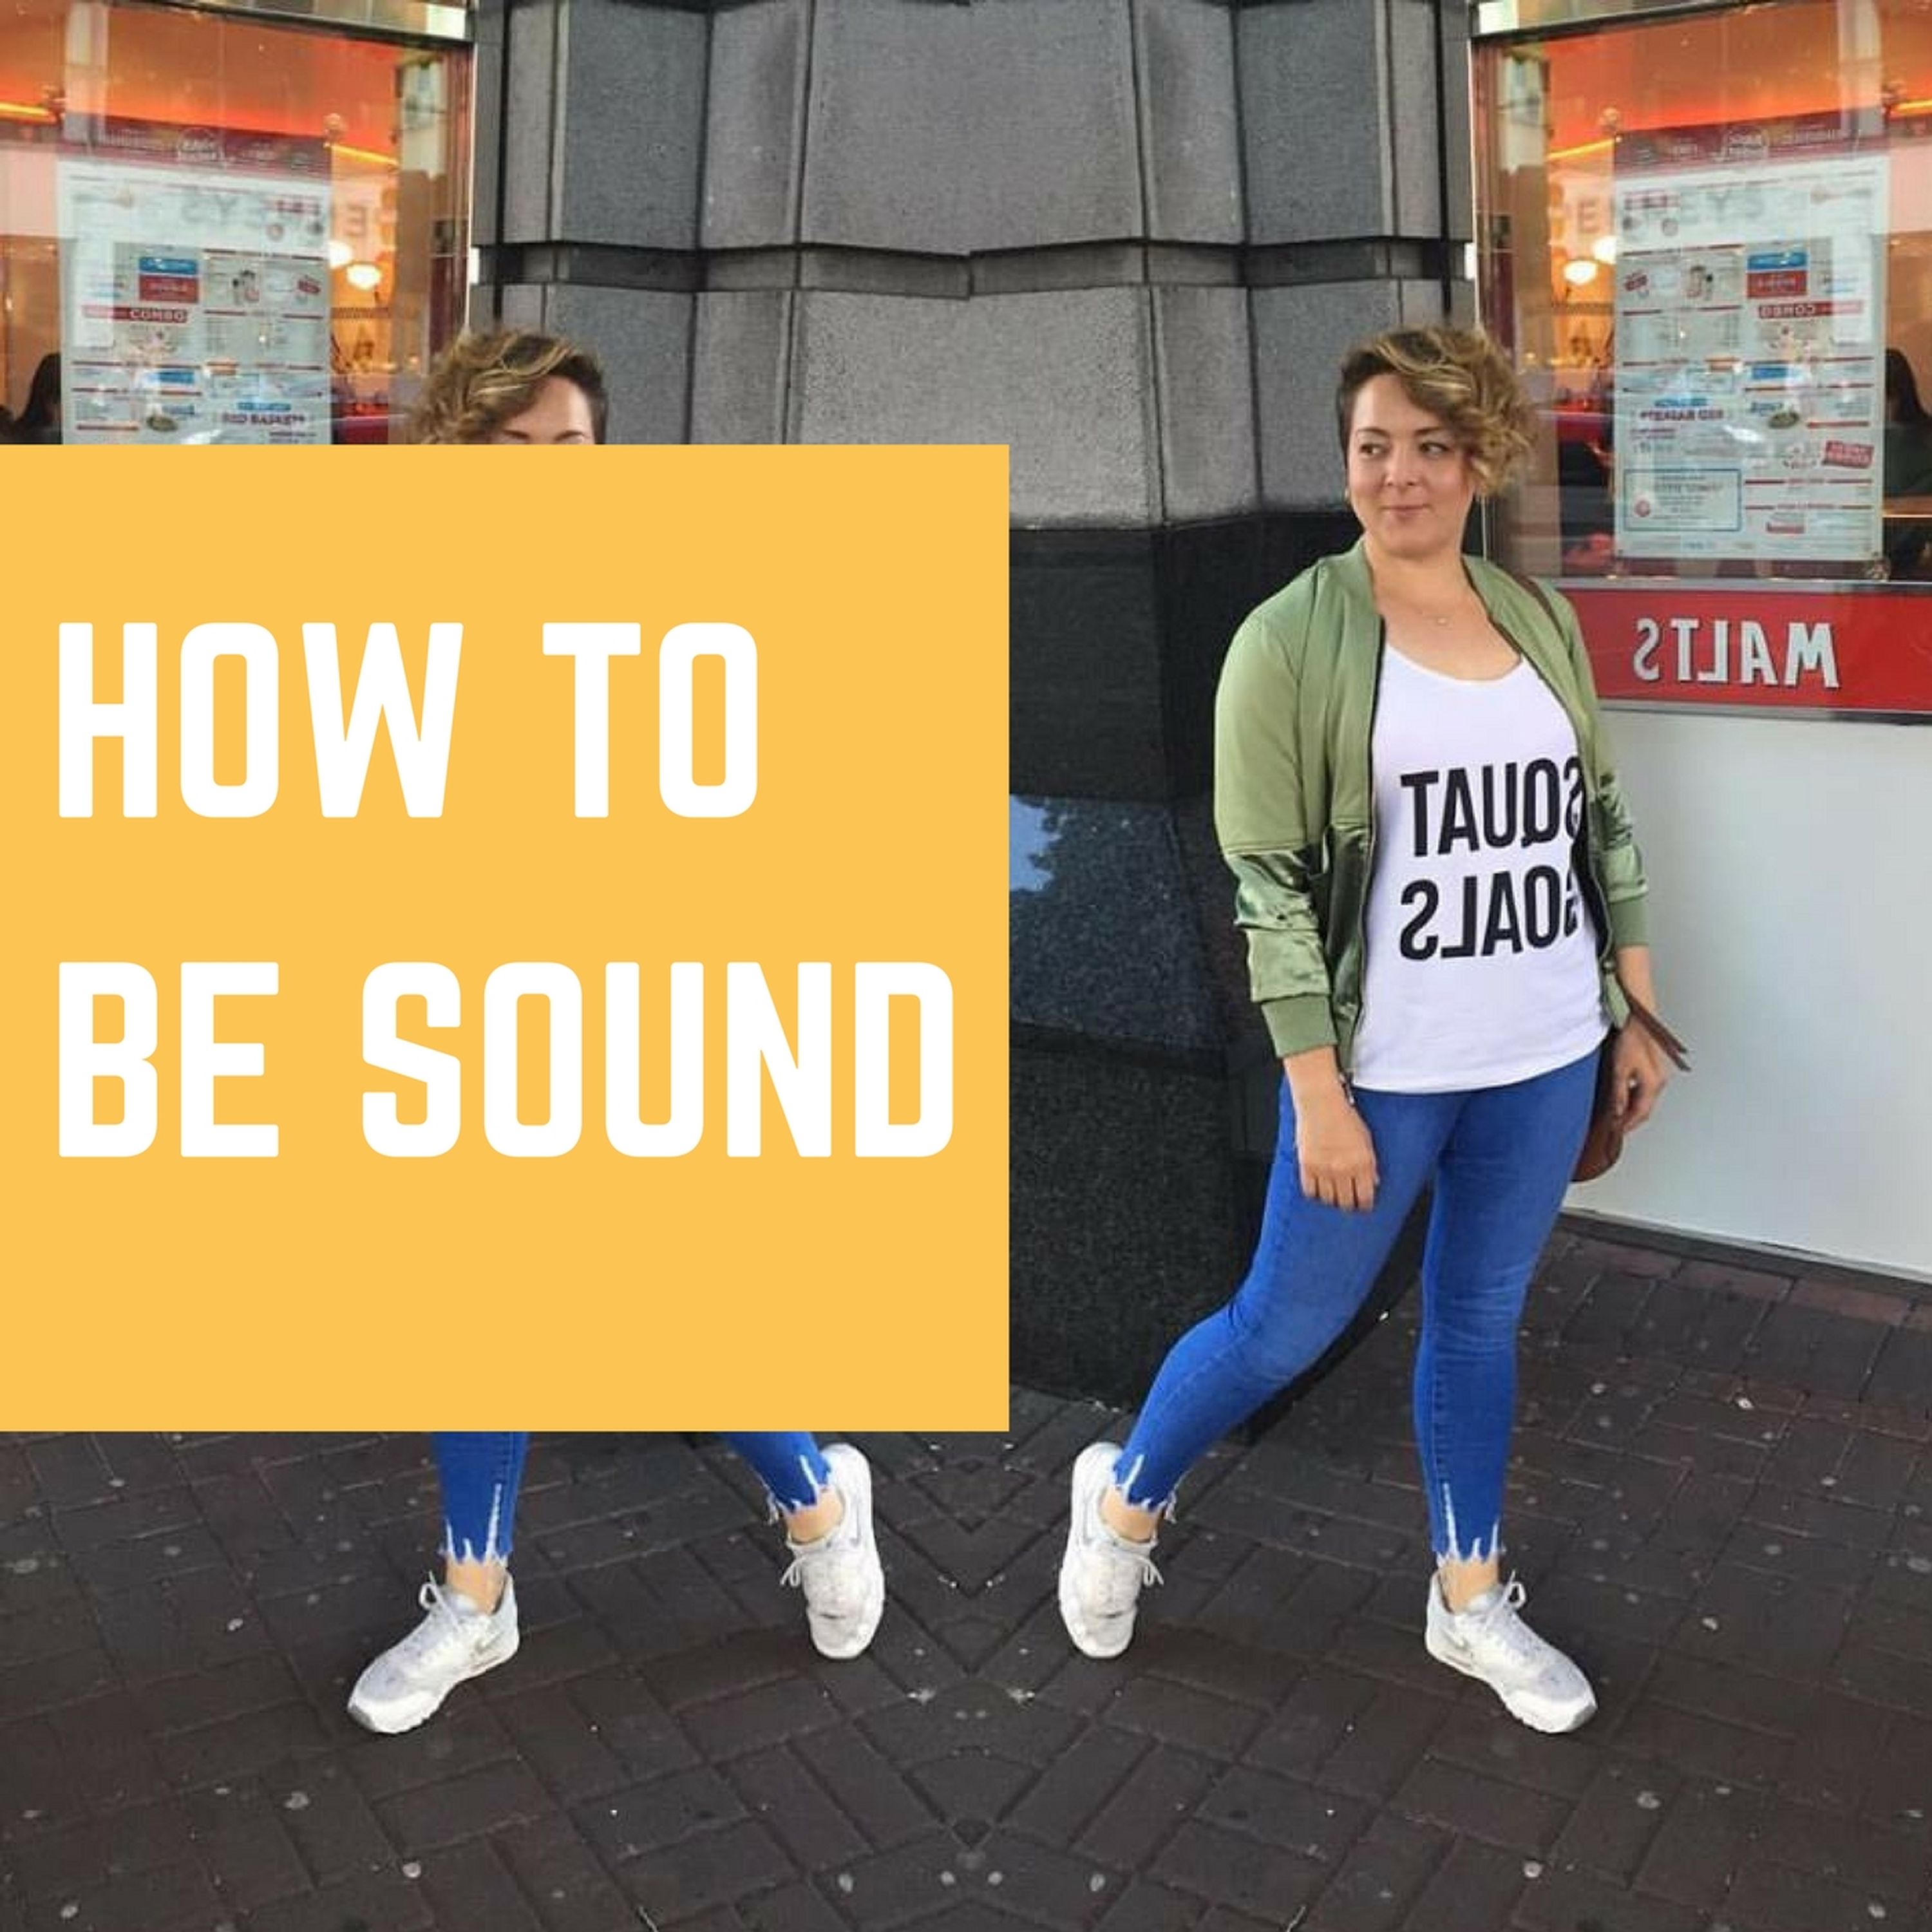 Jette Virdi on how to be sound